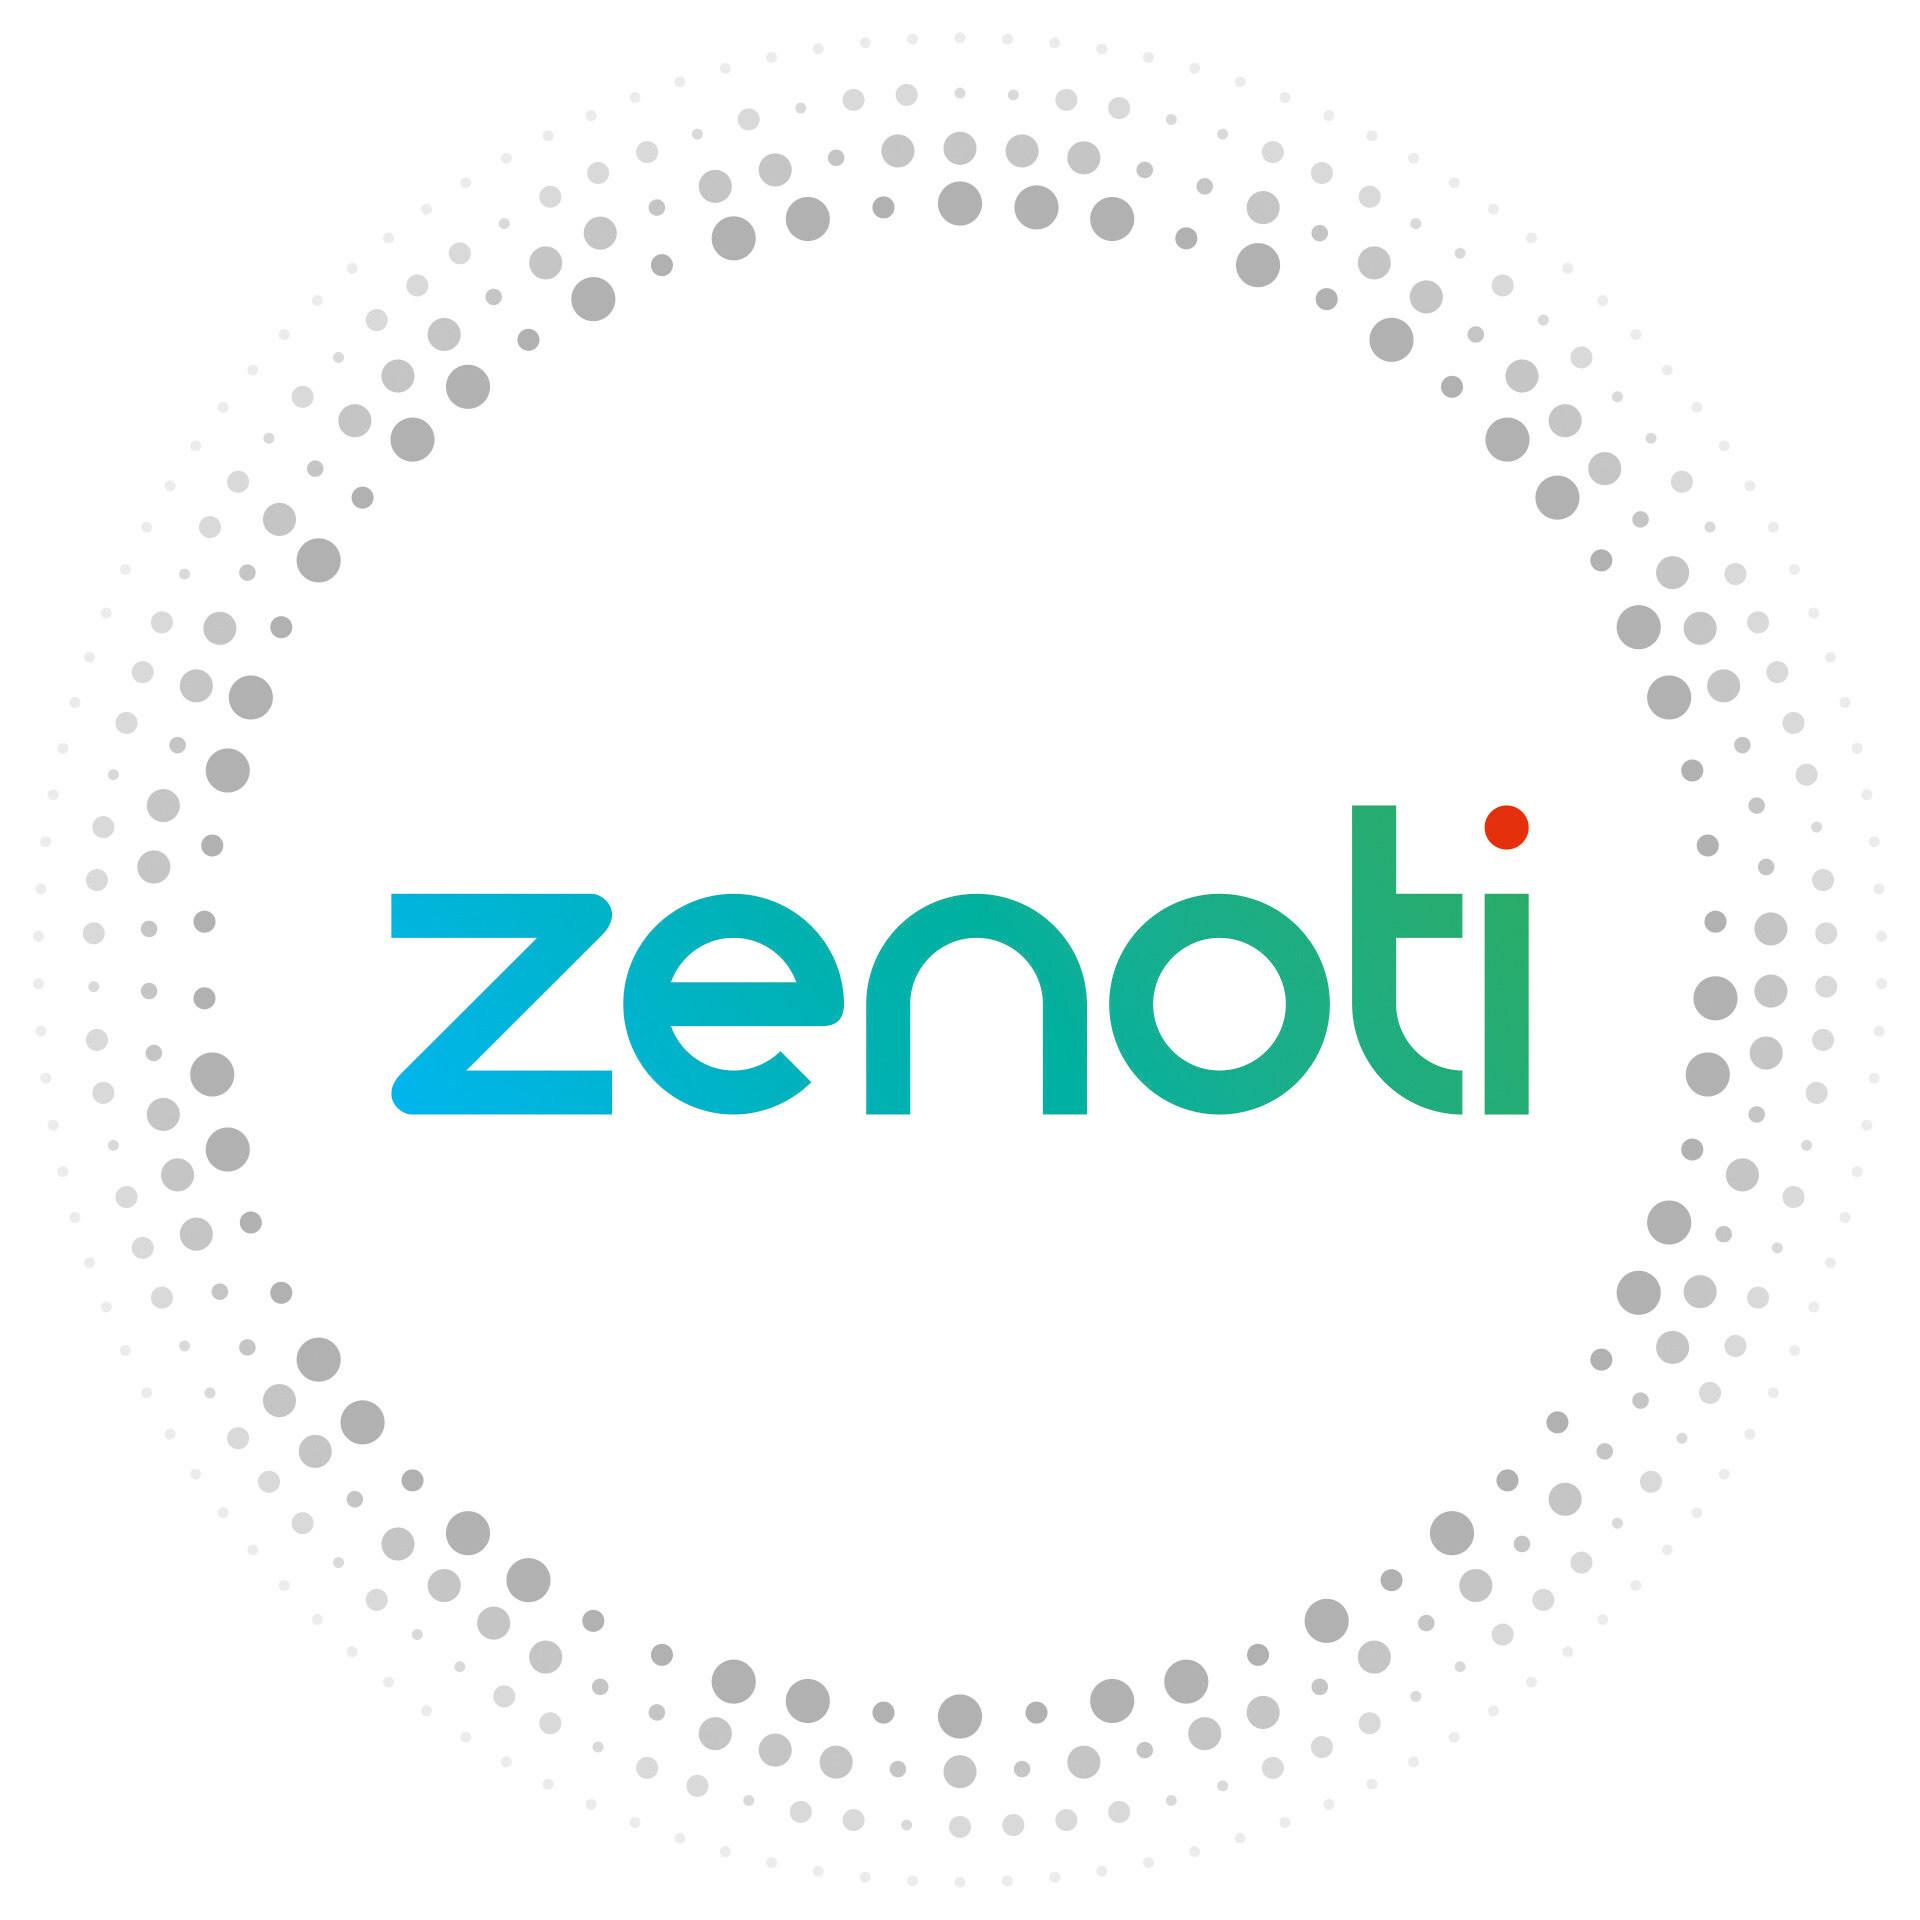 Zenoti Named the Leader in Spa and Salon Management Software and Medical Spa Software, in Latest Report from Established Review Site G2